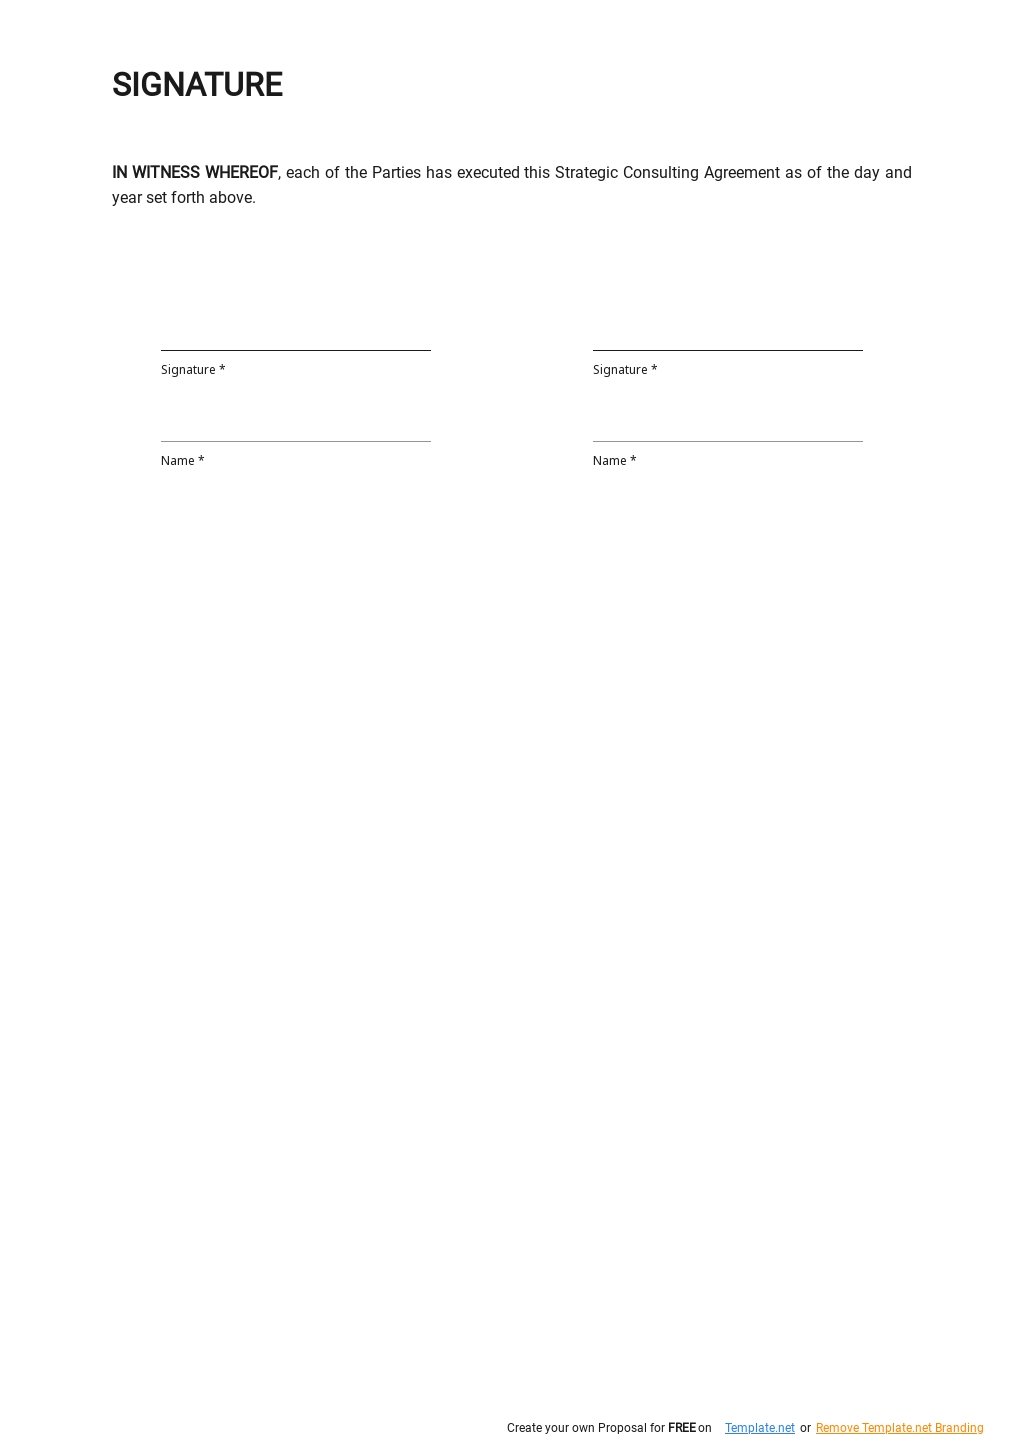 Strategic Consulting Agreement Template 2.jpe